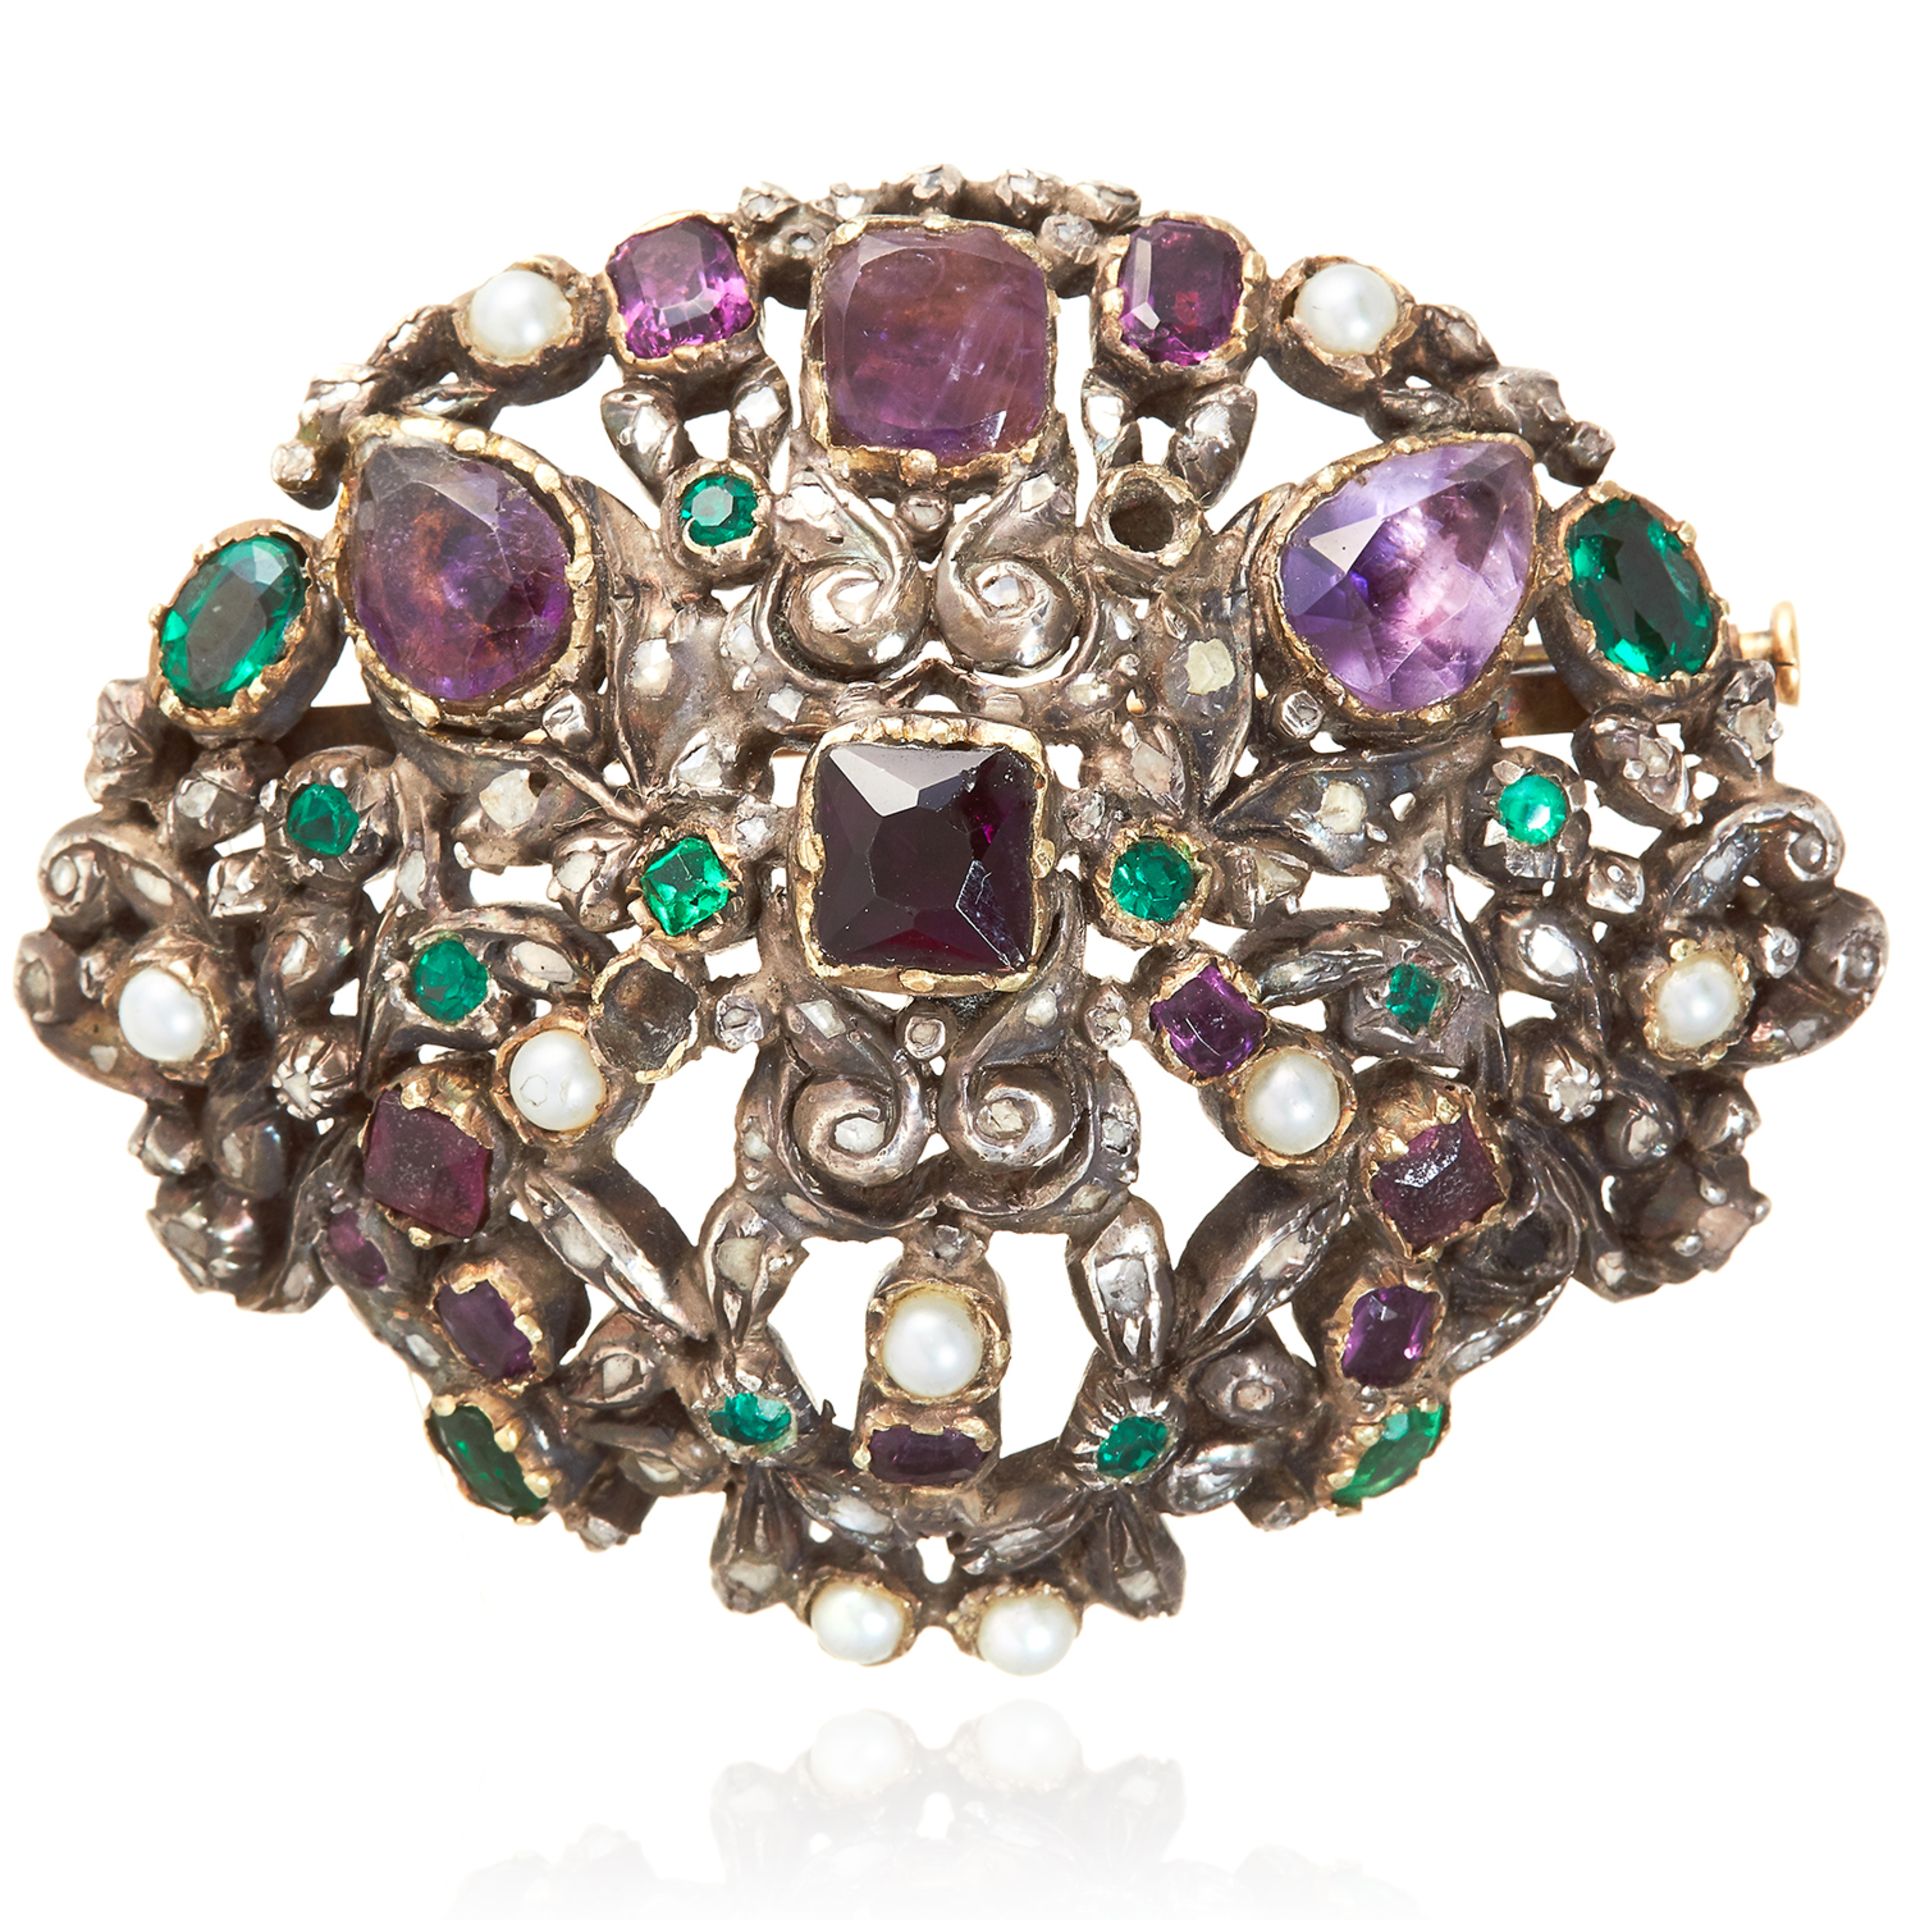 A JEWELLED ANTIQUE BROOCH, EARLY 19TH CENTURY in silver, the scrolling design jewelled with